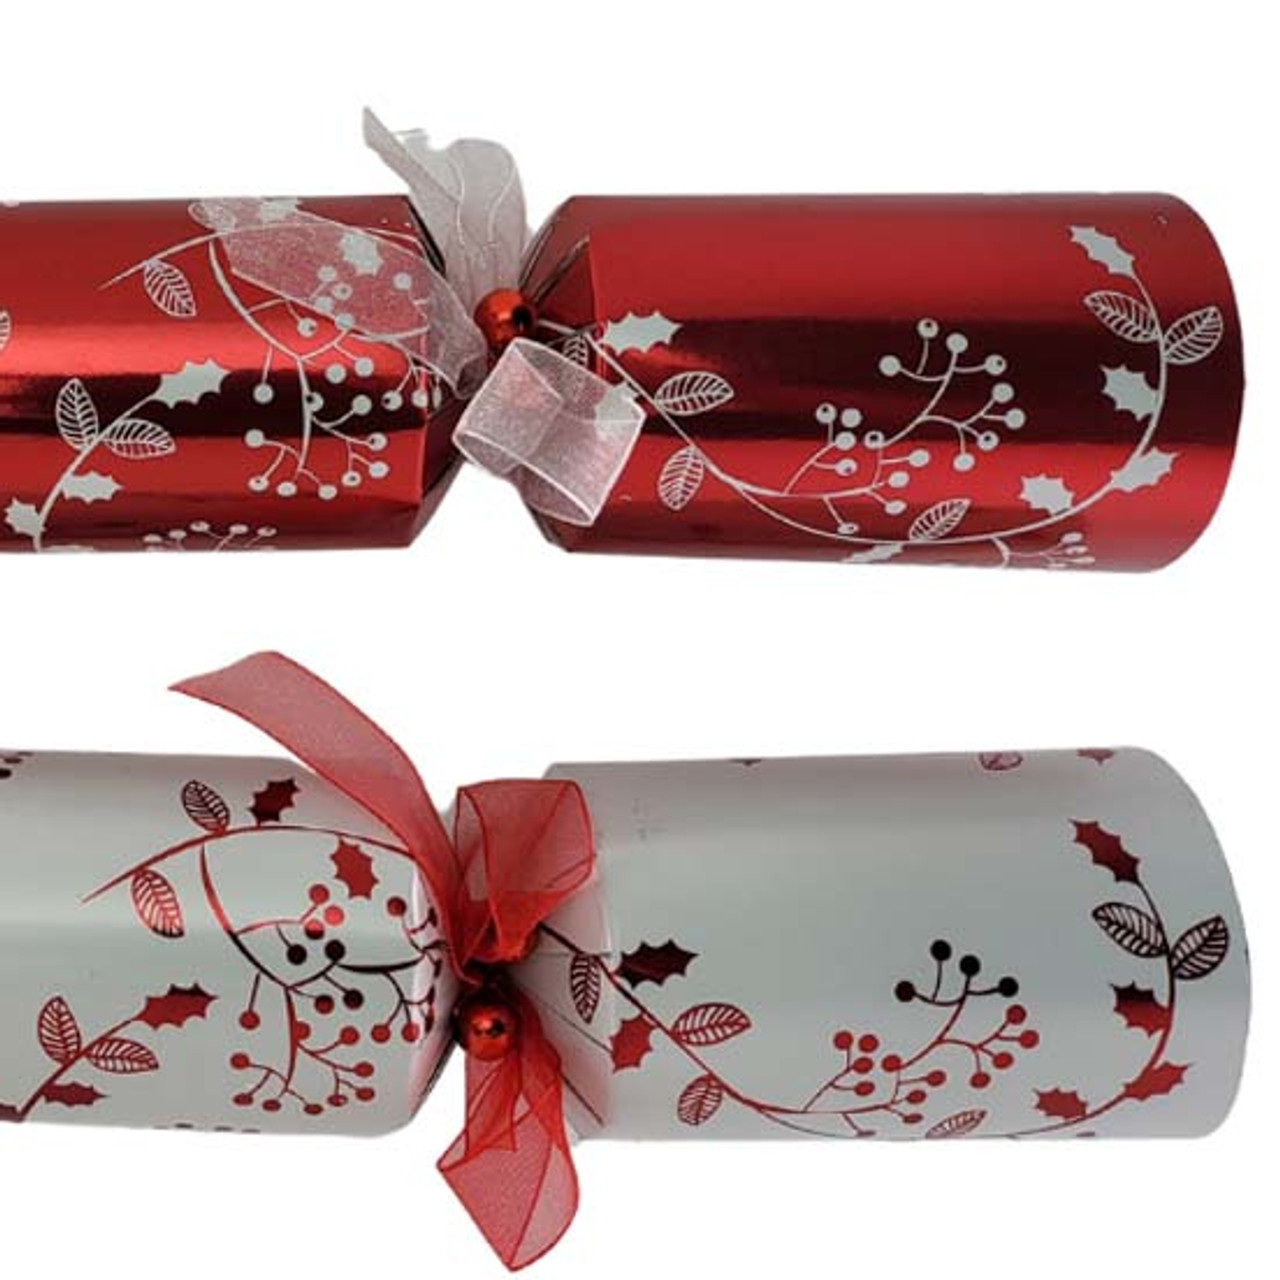  14'' Luxury Holly Berry Cracker White Red - Case of 12